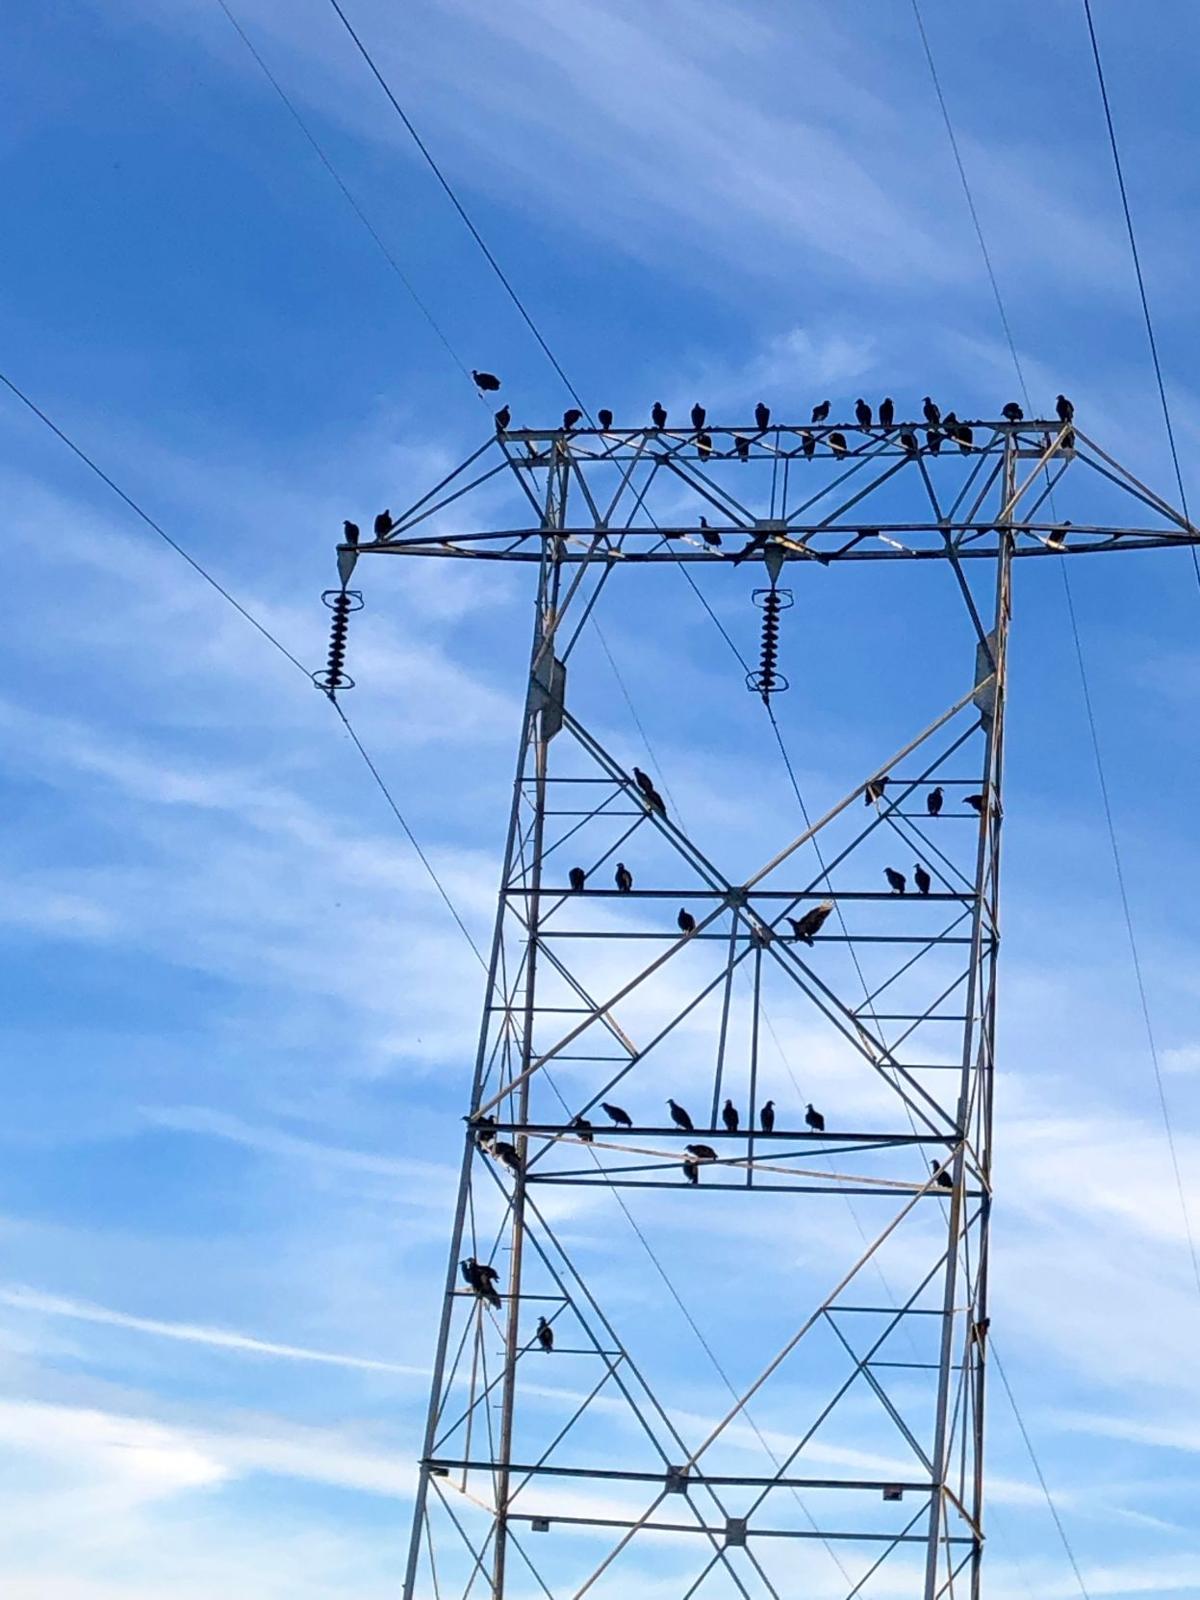 Dozens of black vultures linger on a tower near Karen Foster's Jeffersonville farm. Submitted photo